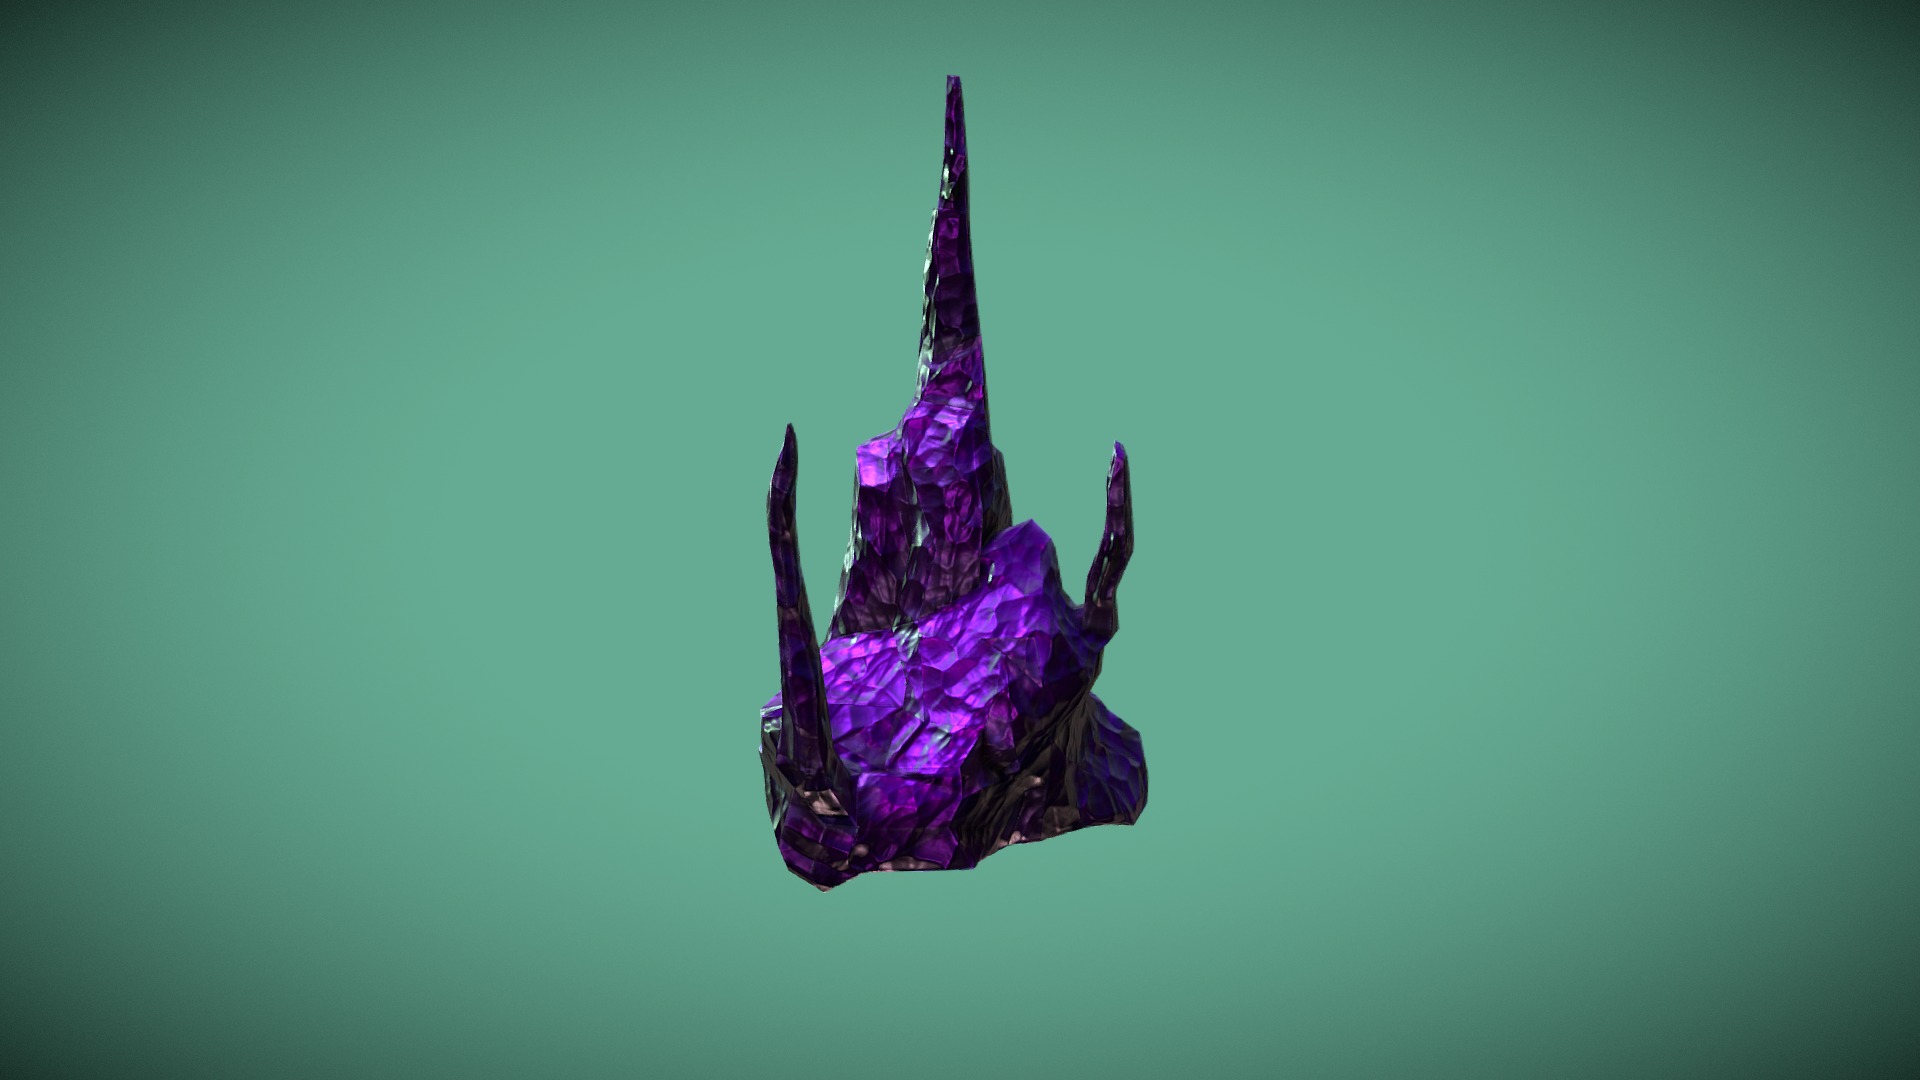 3D model Stylized Stalagmite Obsidian Rock - This is a 3D model of the Stylized Stalagmite Obsidian Rock. The 3D model is about a purple and black fish.